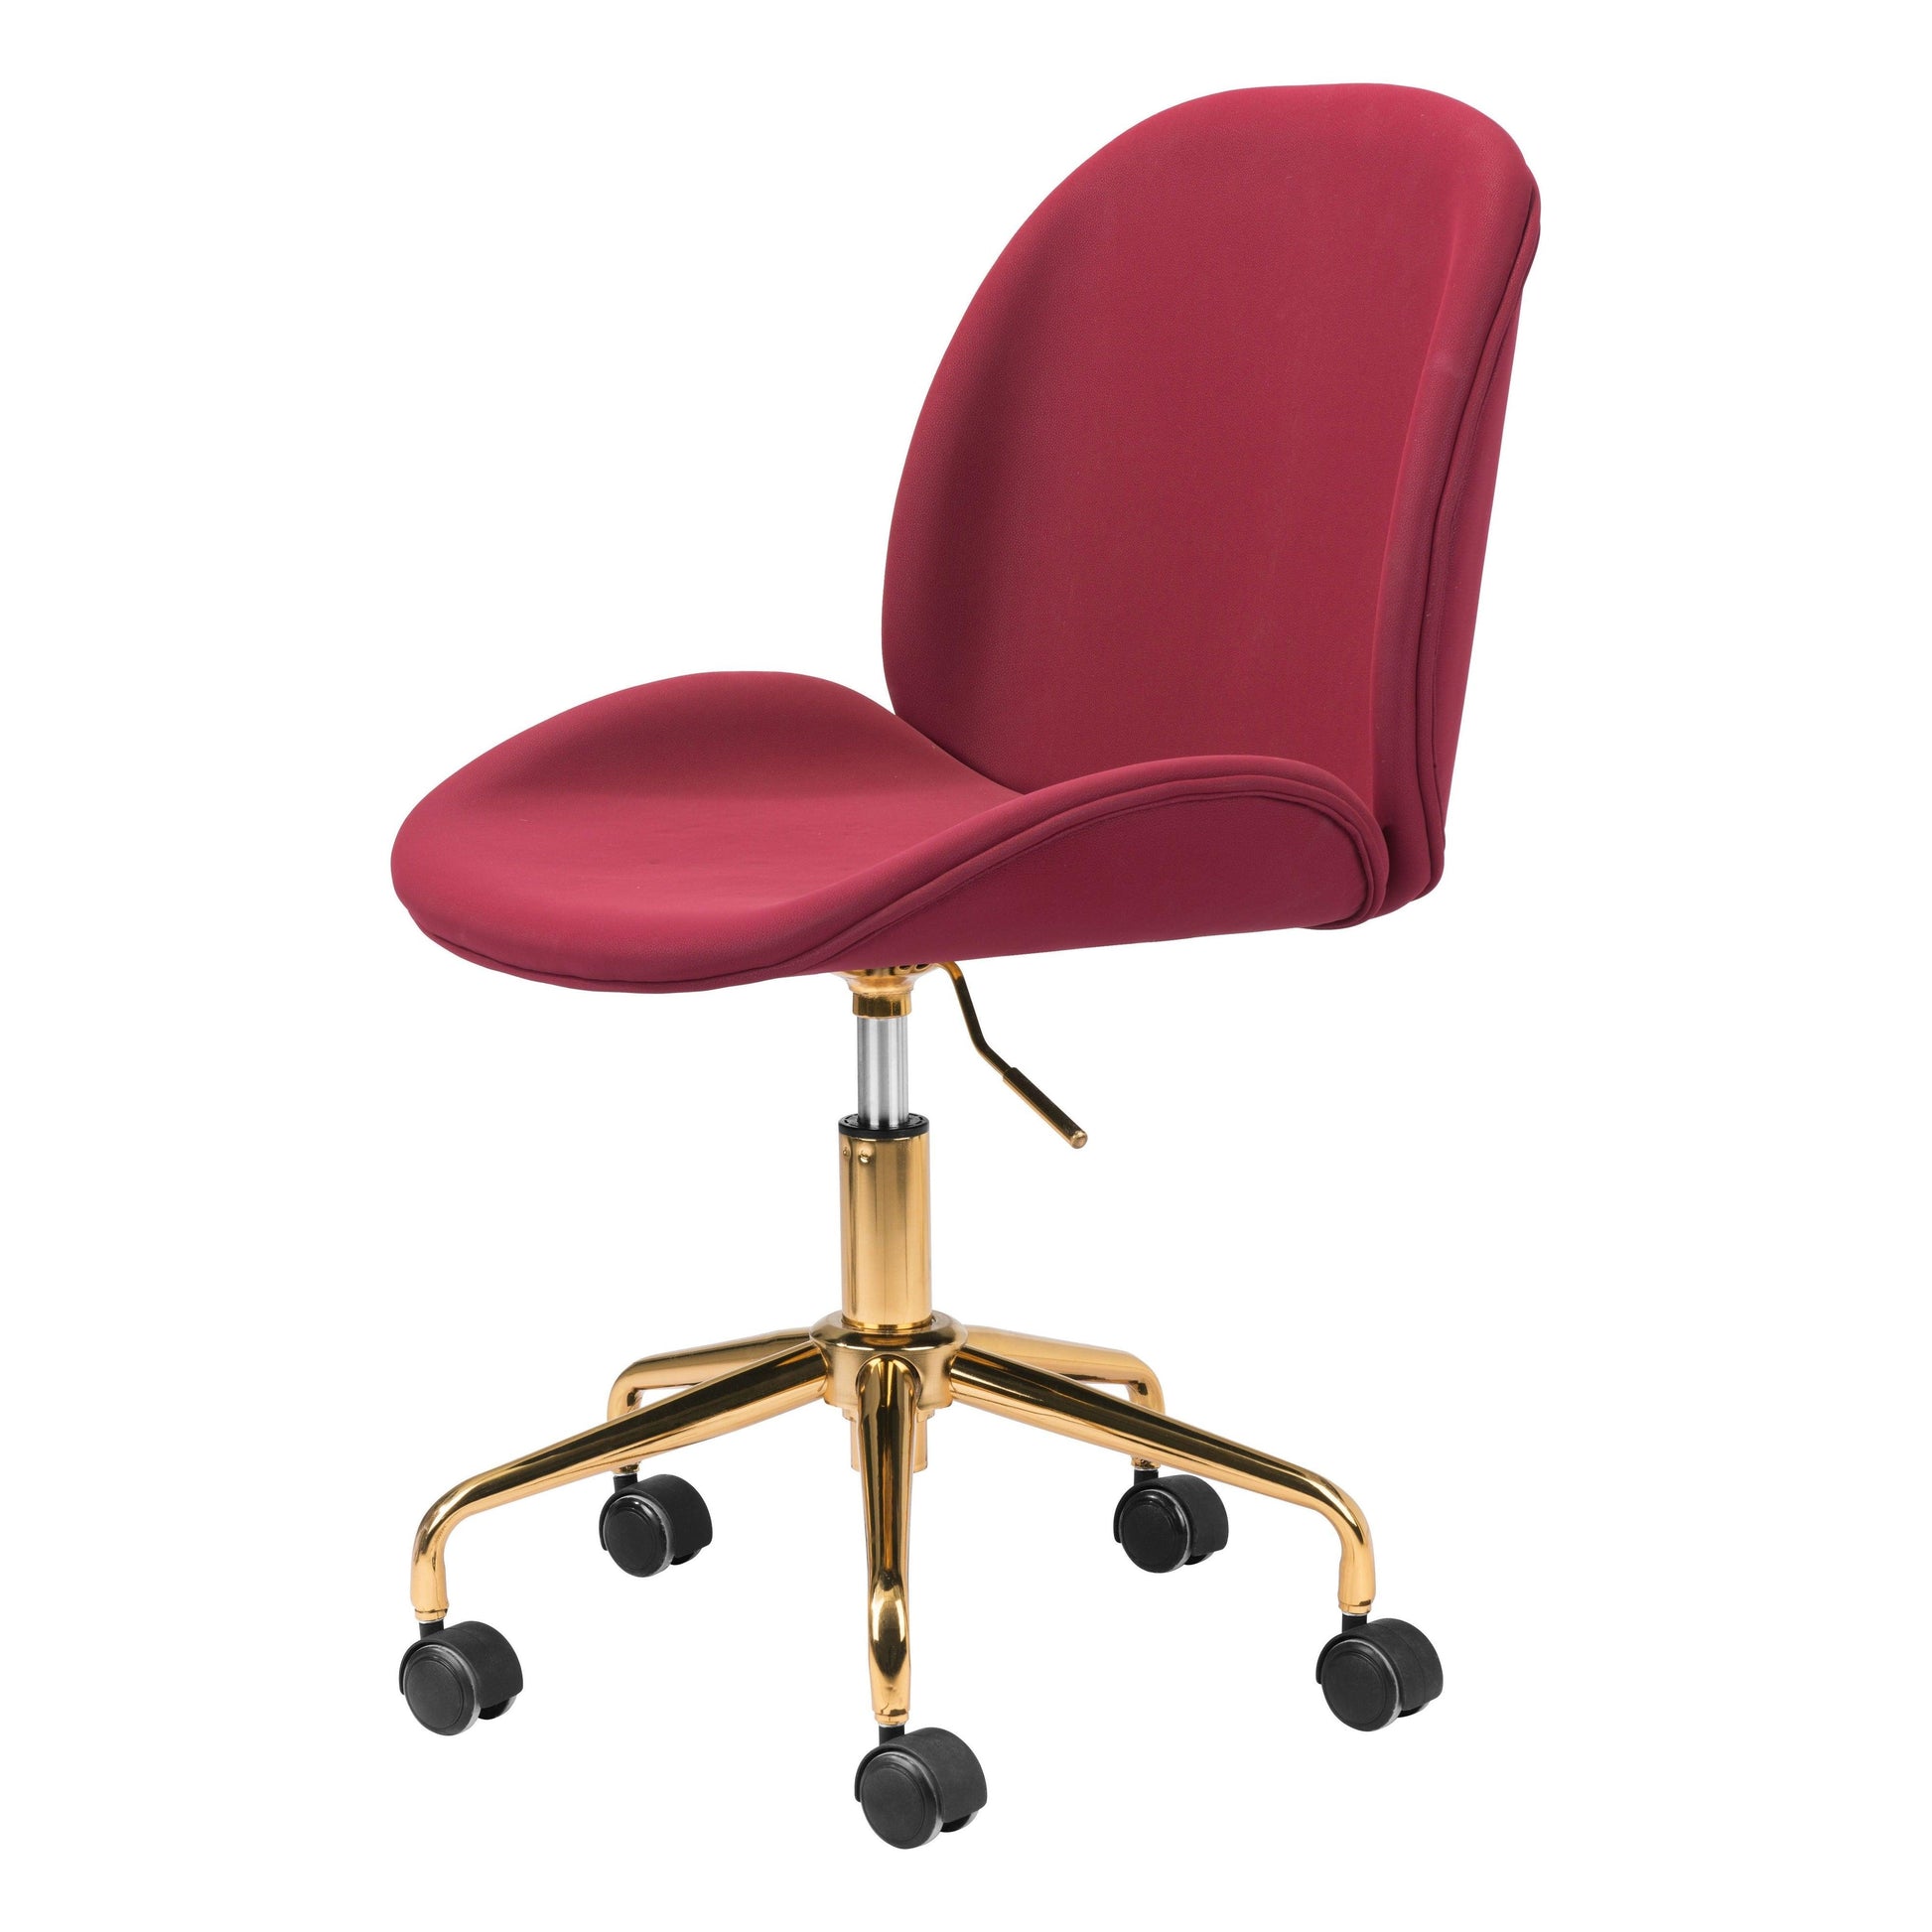 Miles Office Chair Red - Sideboards and Things Accents_Gold, Brand_Zuo Modern, Color_Gold, Color_Red, Depth_20-30, Features_Adjustable Height, Features_Swivel, Finish_Powder Coated, Height_30-40, Materials_Metal, Metal Type_Steel, Upholstery Type_Fabric Blend, Upholstery Type_Polyester, Width_20-30